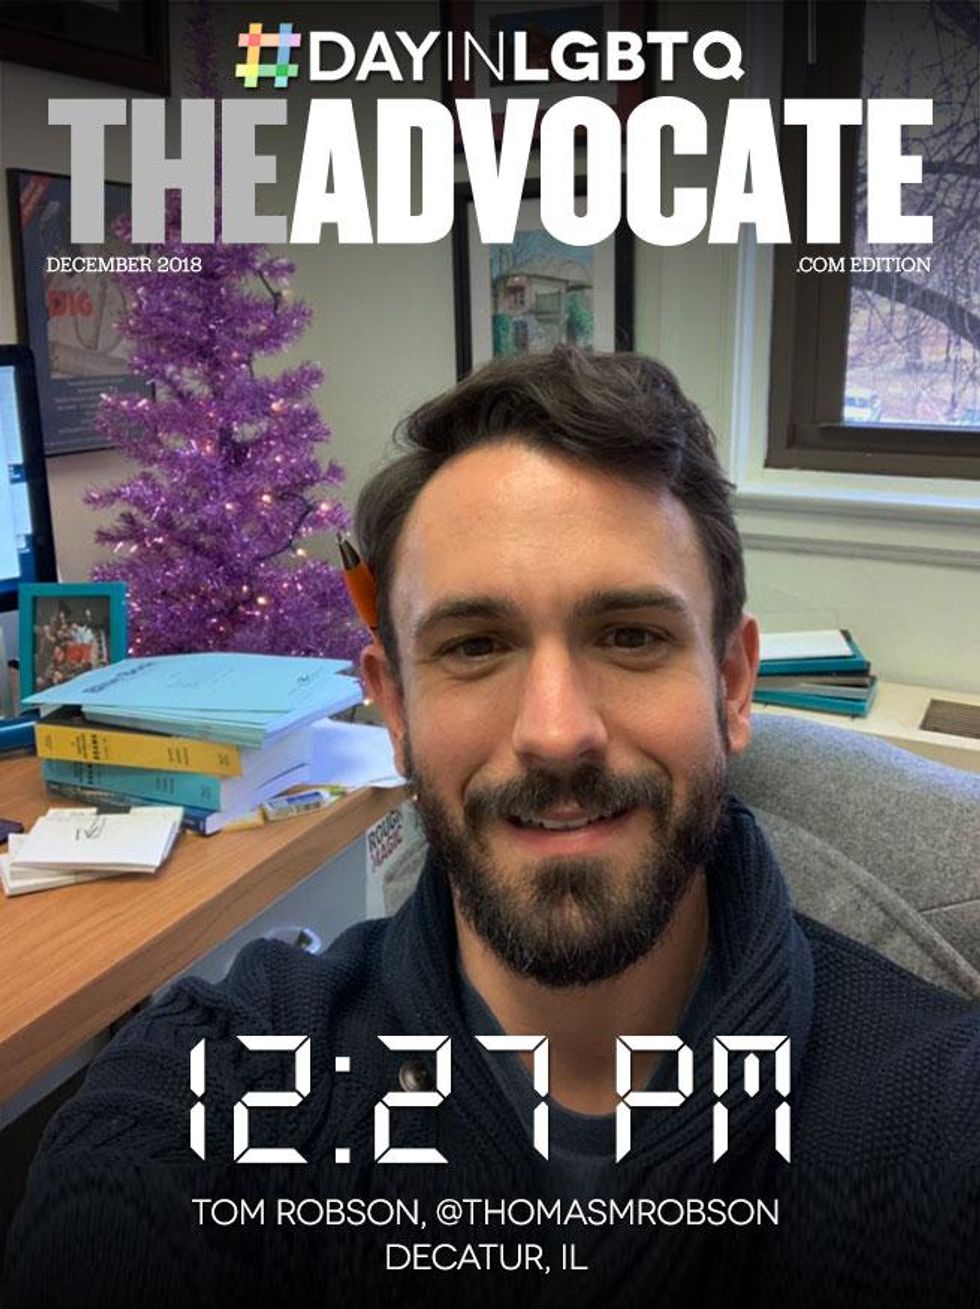 12-27-tom-robson-theadvocate-2018-dayinlgbt-cover-template-655